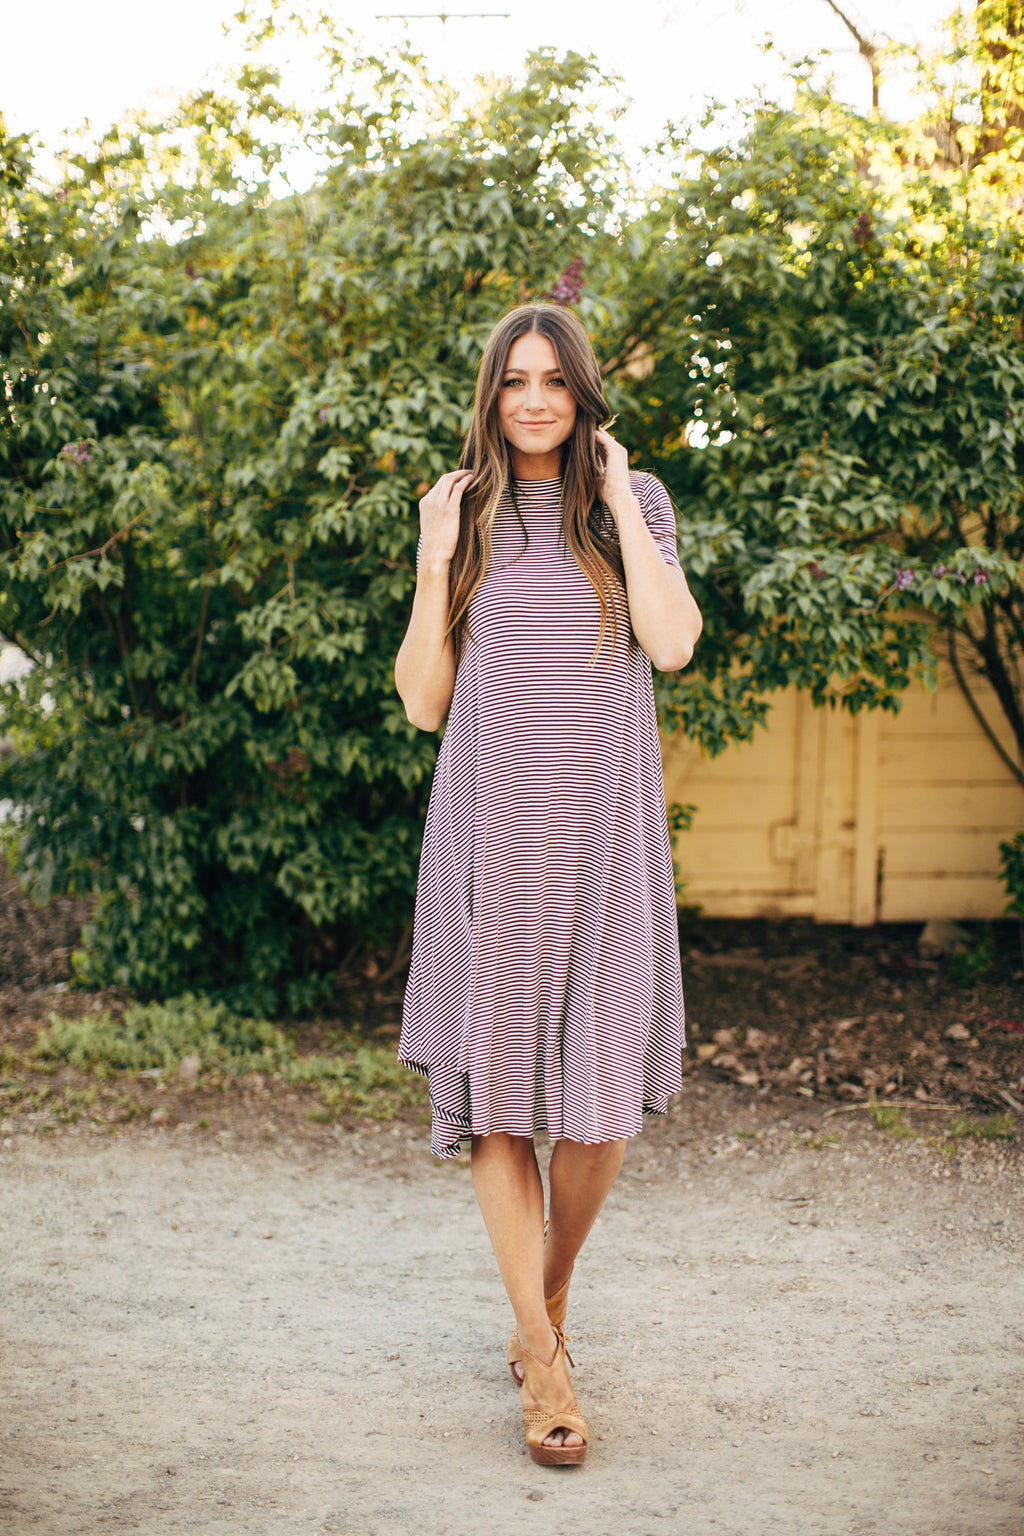 How To: Style the Simple Spring Dress